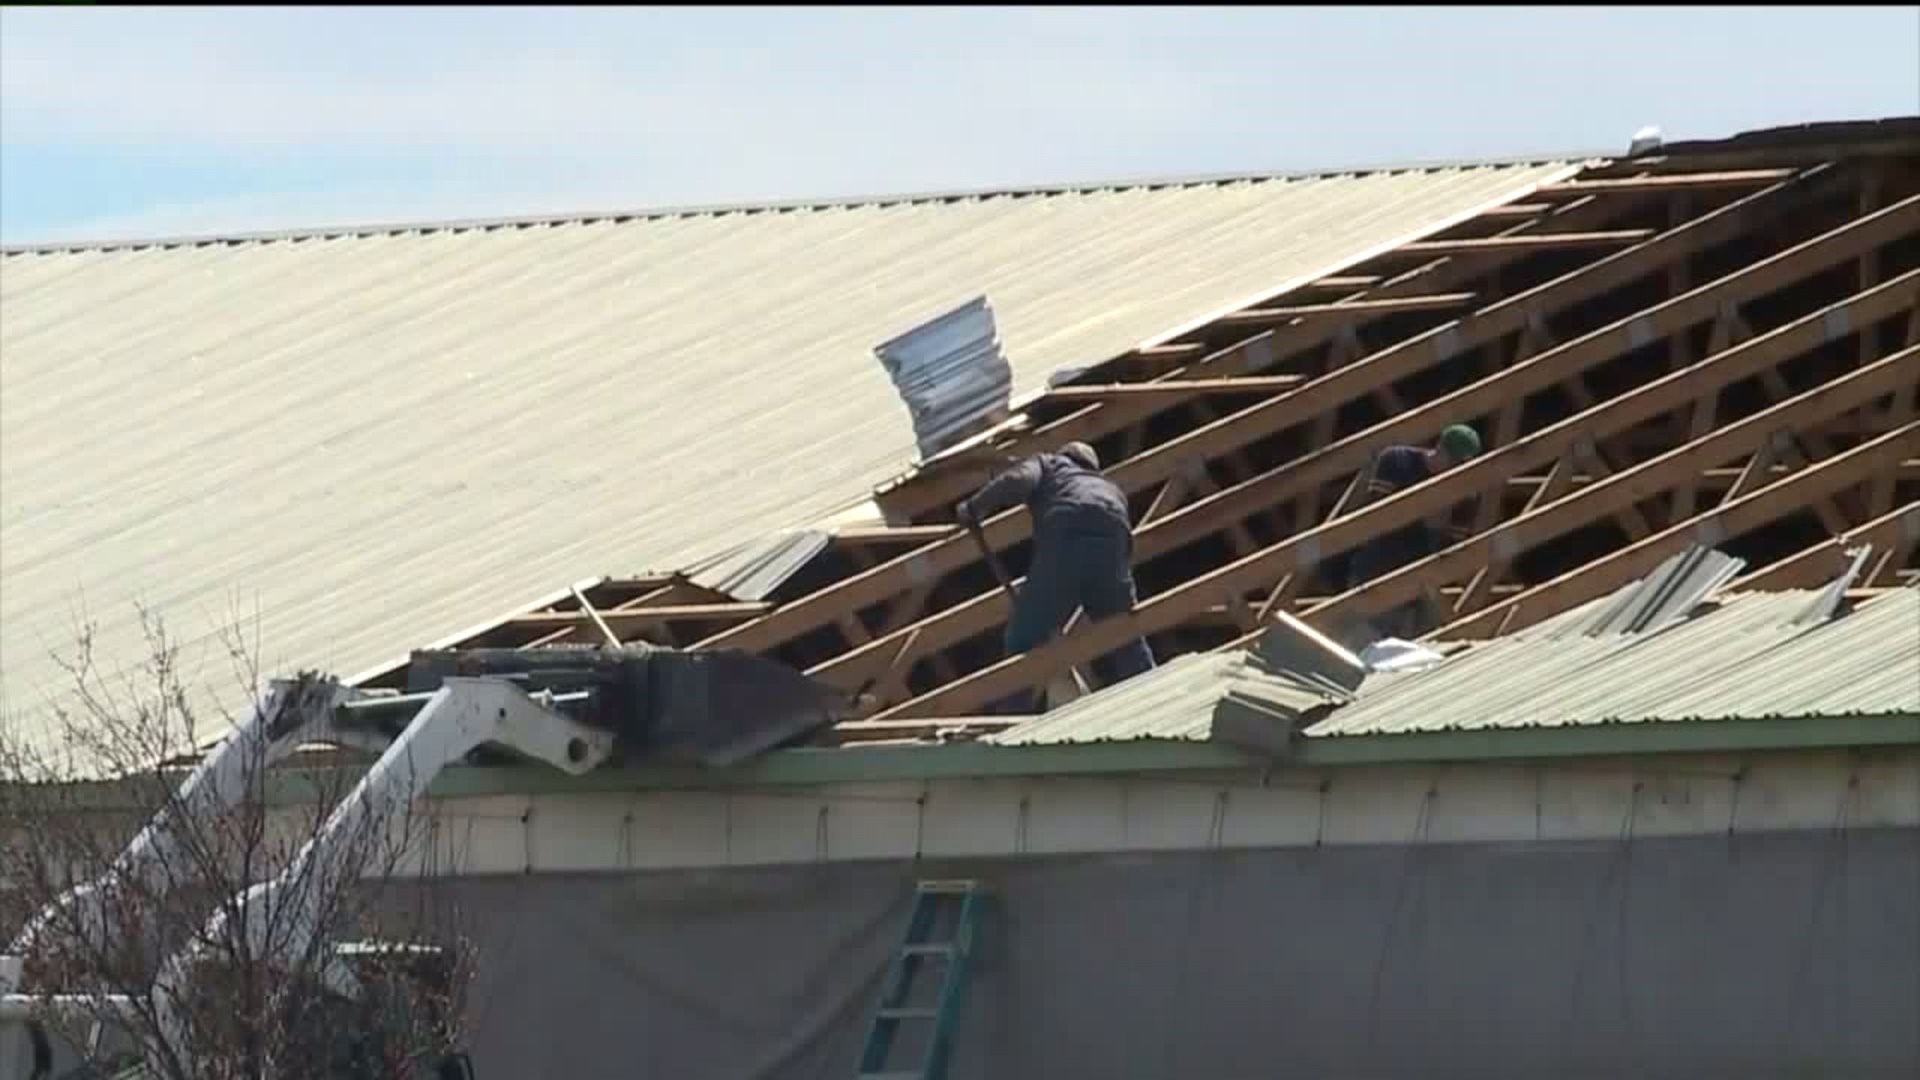 'Withstood them all but this one' - Tornado Cleanup in Union County